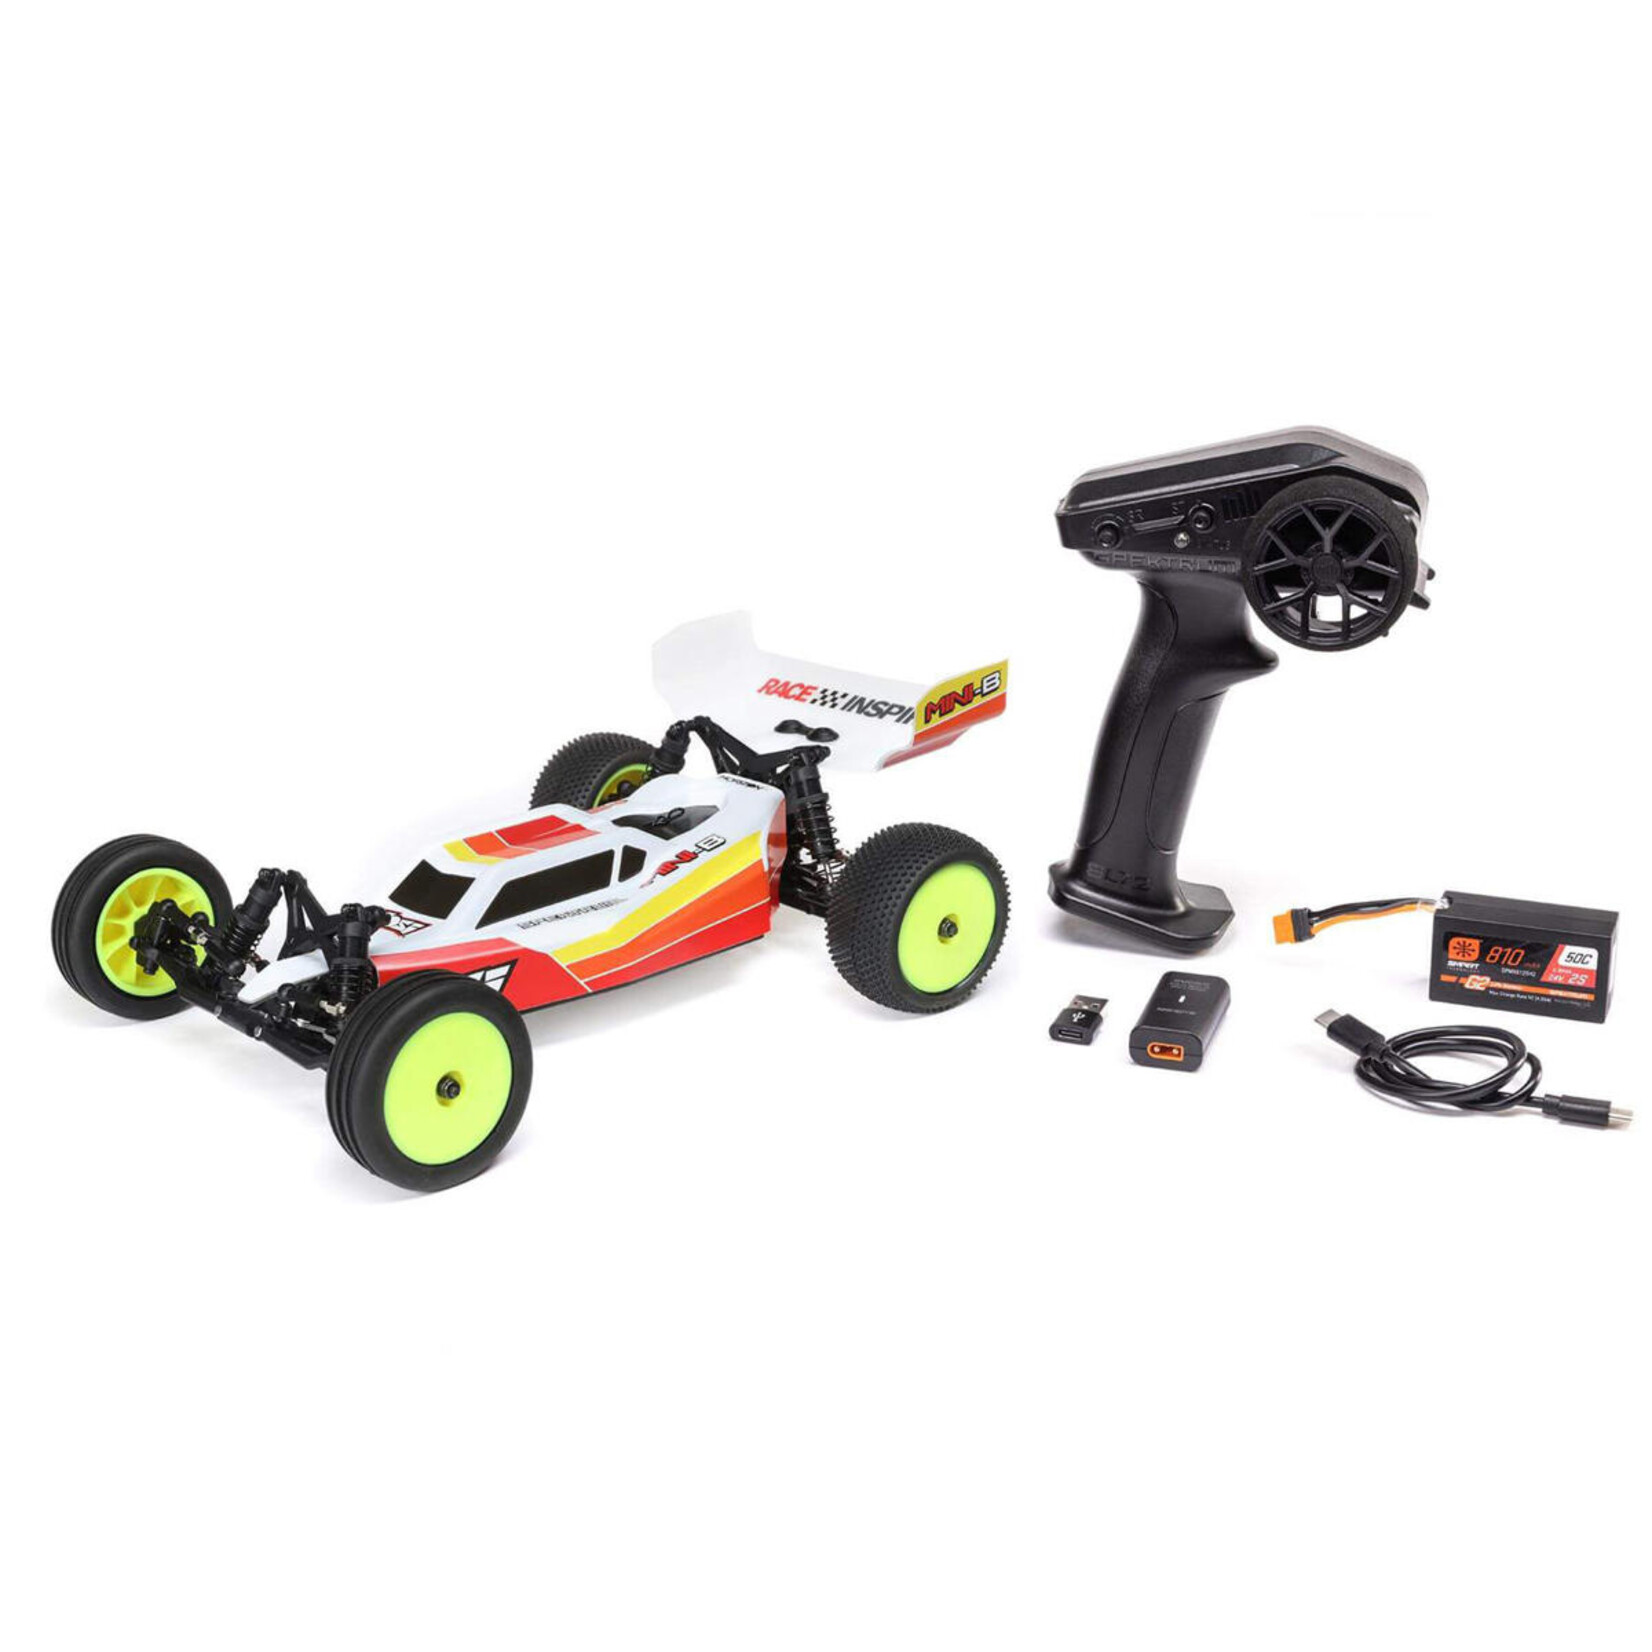 Losi Losi Mini-B 1/16 RTR Brushless 2WD Buggy (Red) w/2.4GHz Radio, Battery & Charger #LOS01024T1